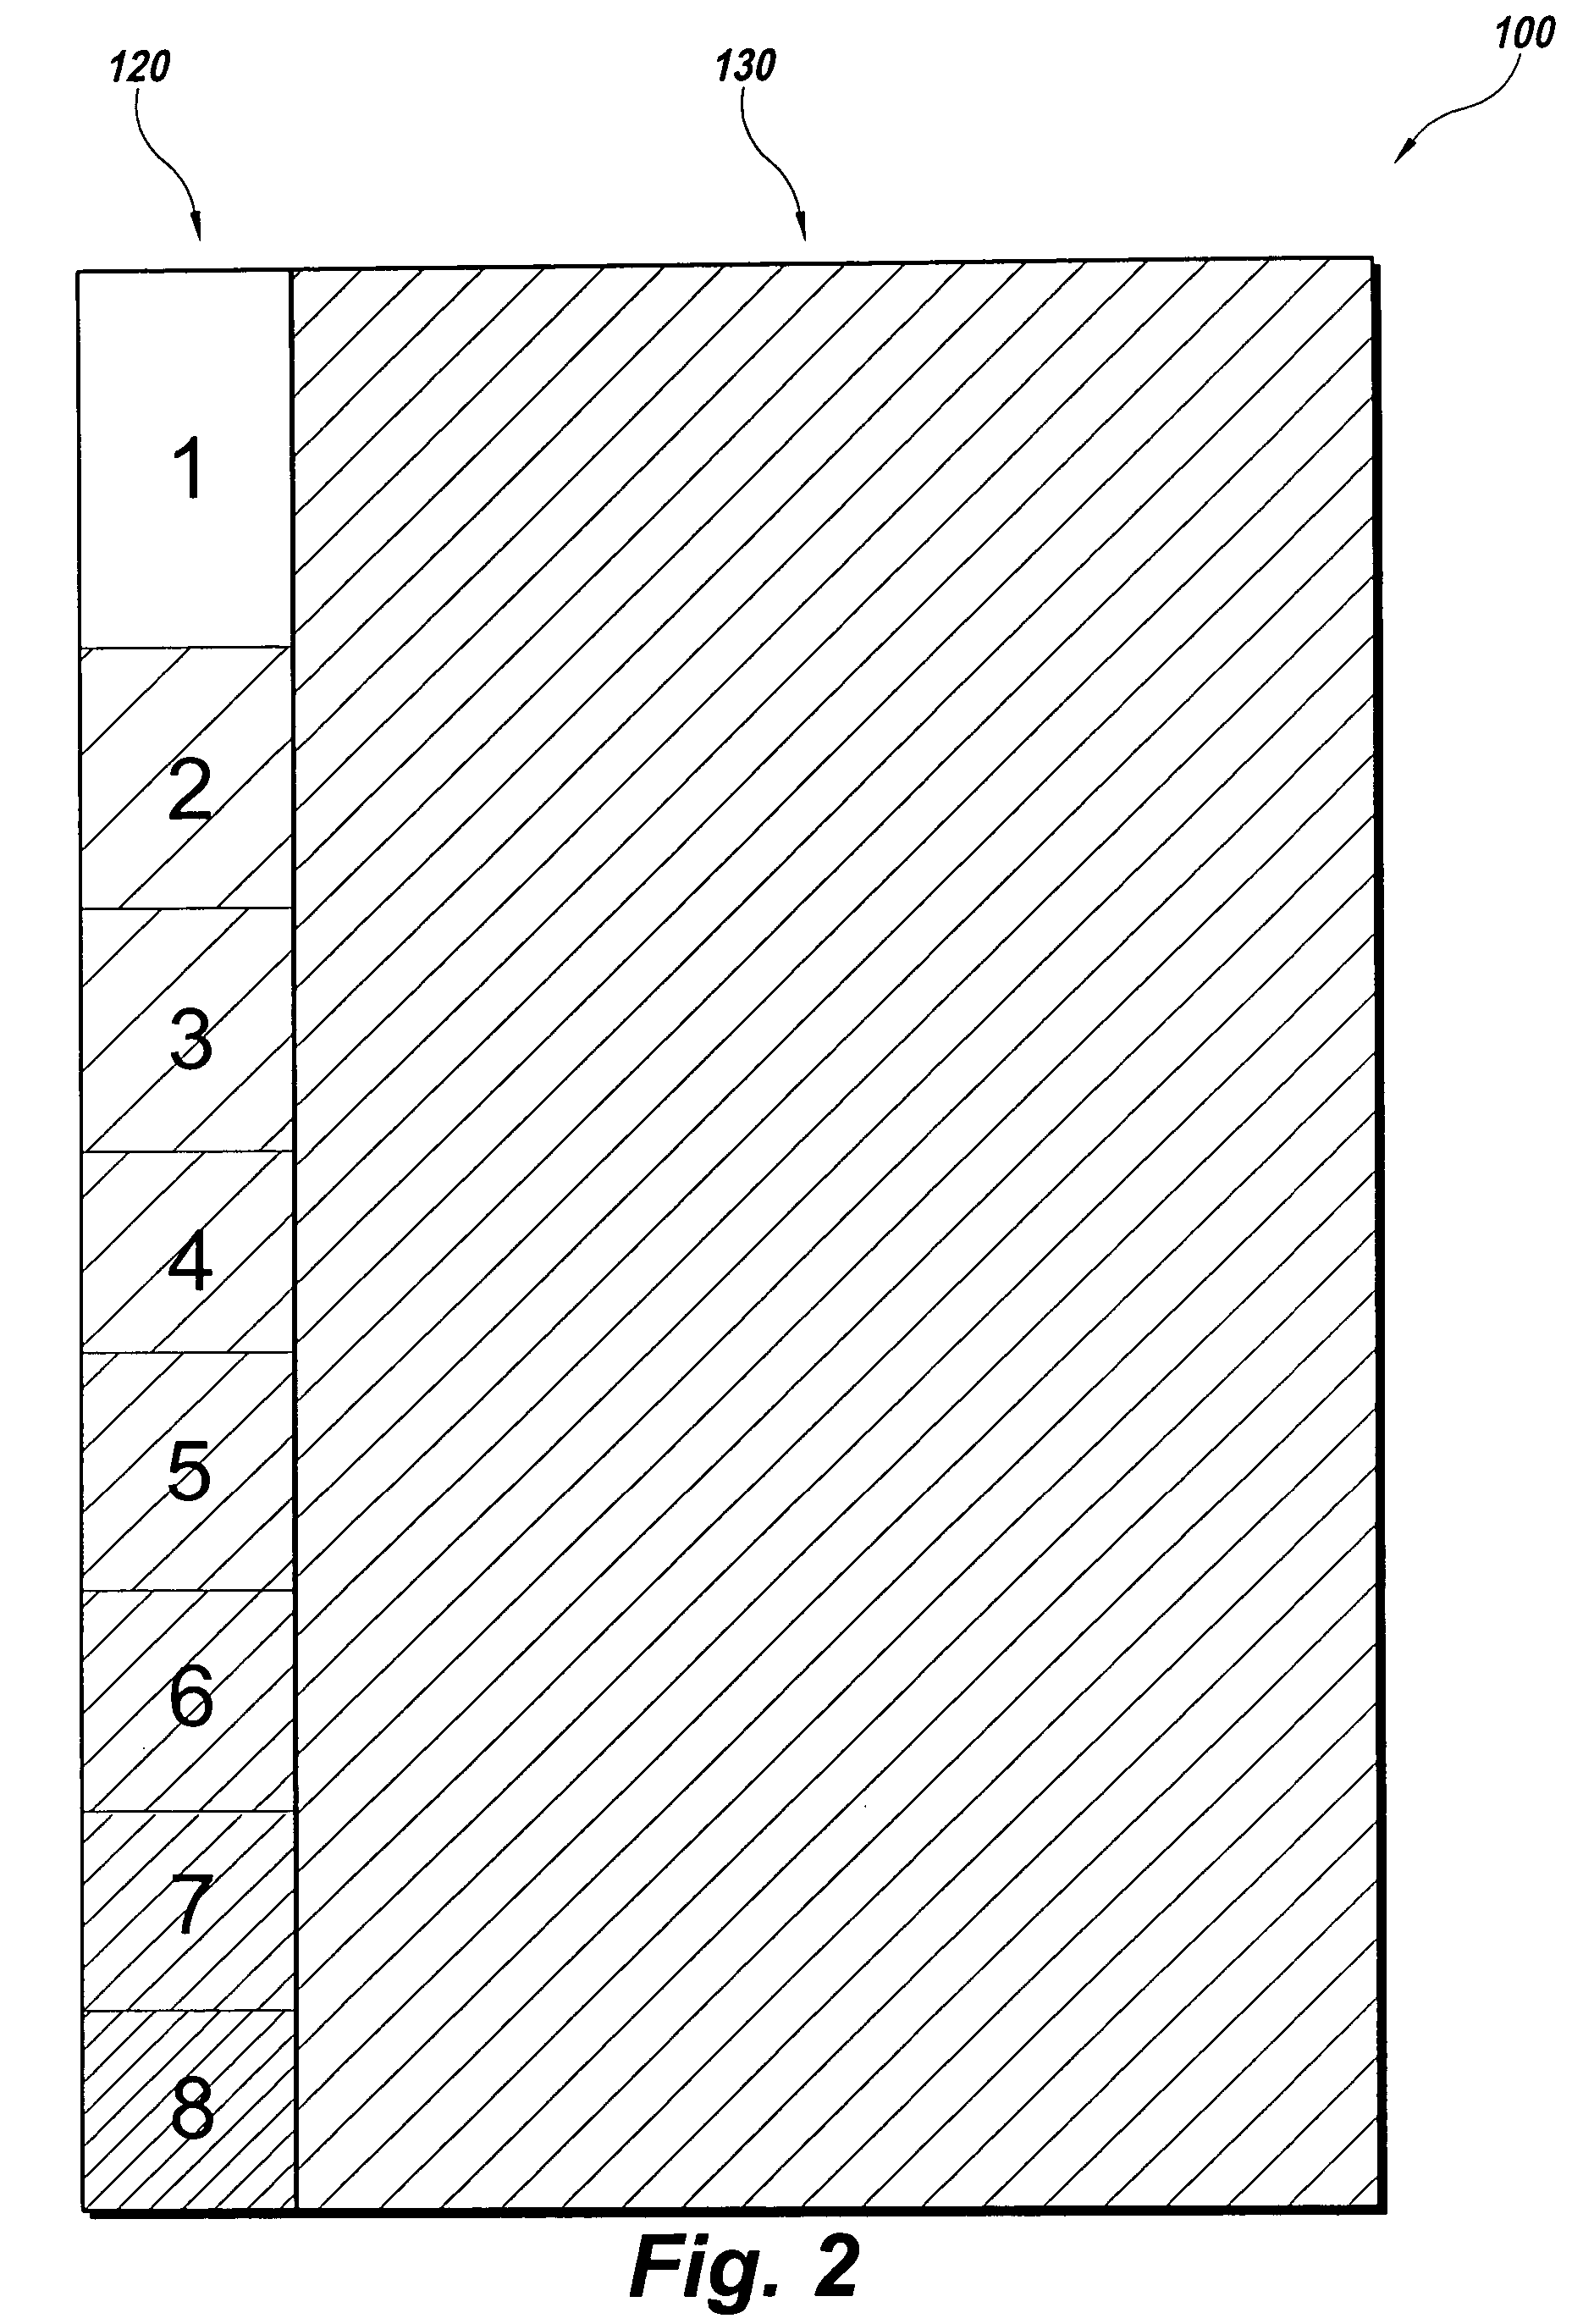 Apparatus and method for measuring differences in the transmission of light through a lens of an eye